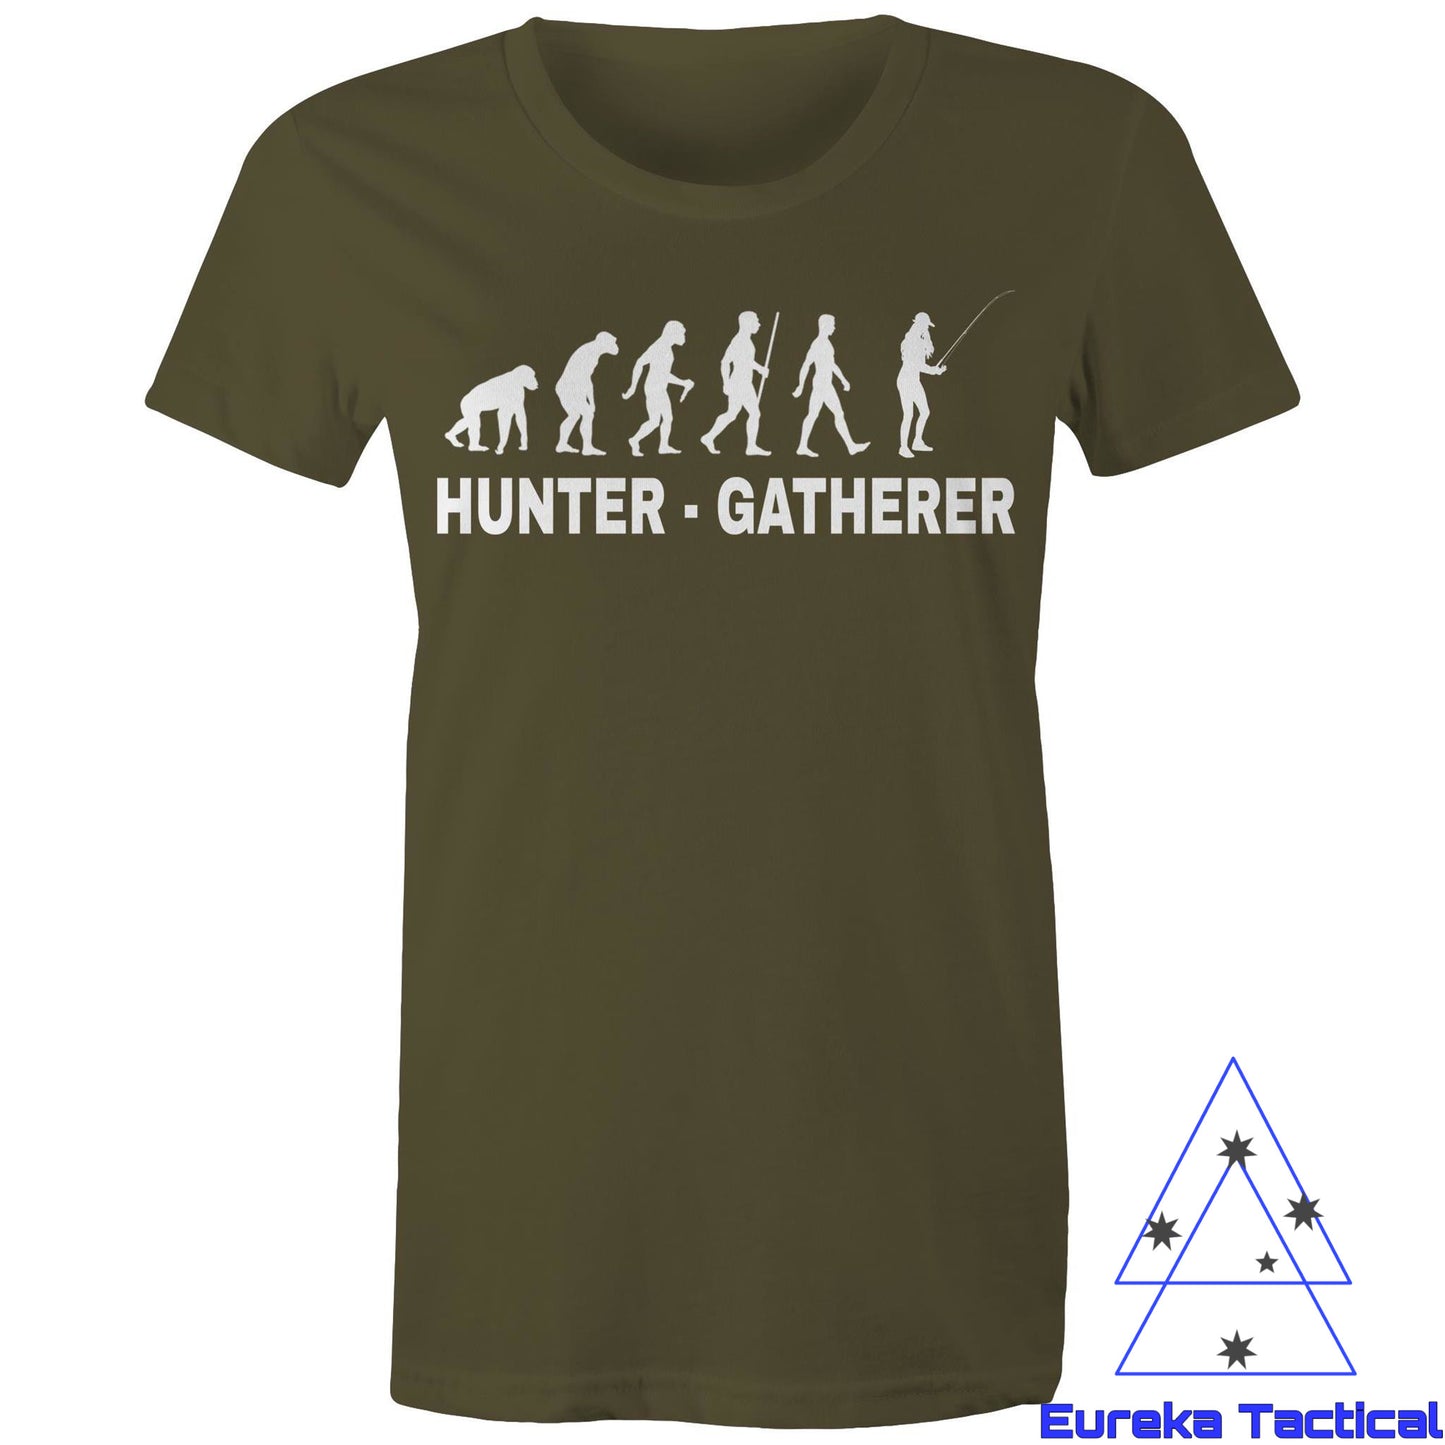 Hunter Gatherer - Fishing. AS Color 100% cotton womens maple tee.